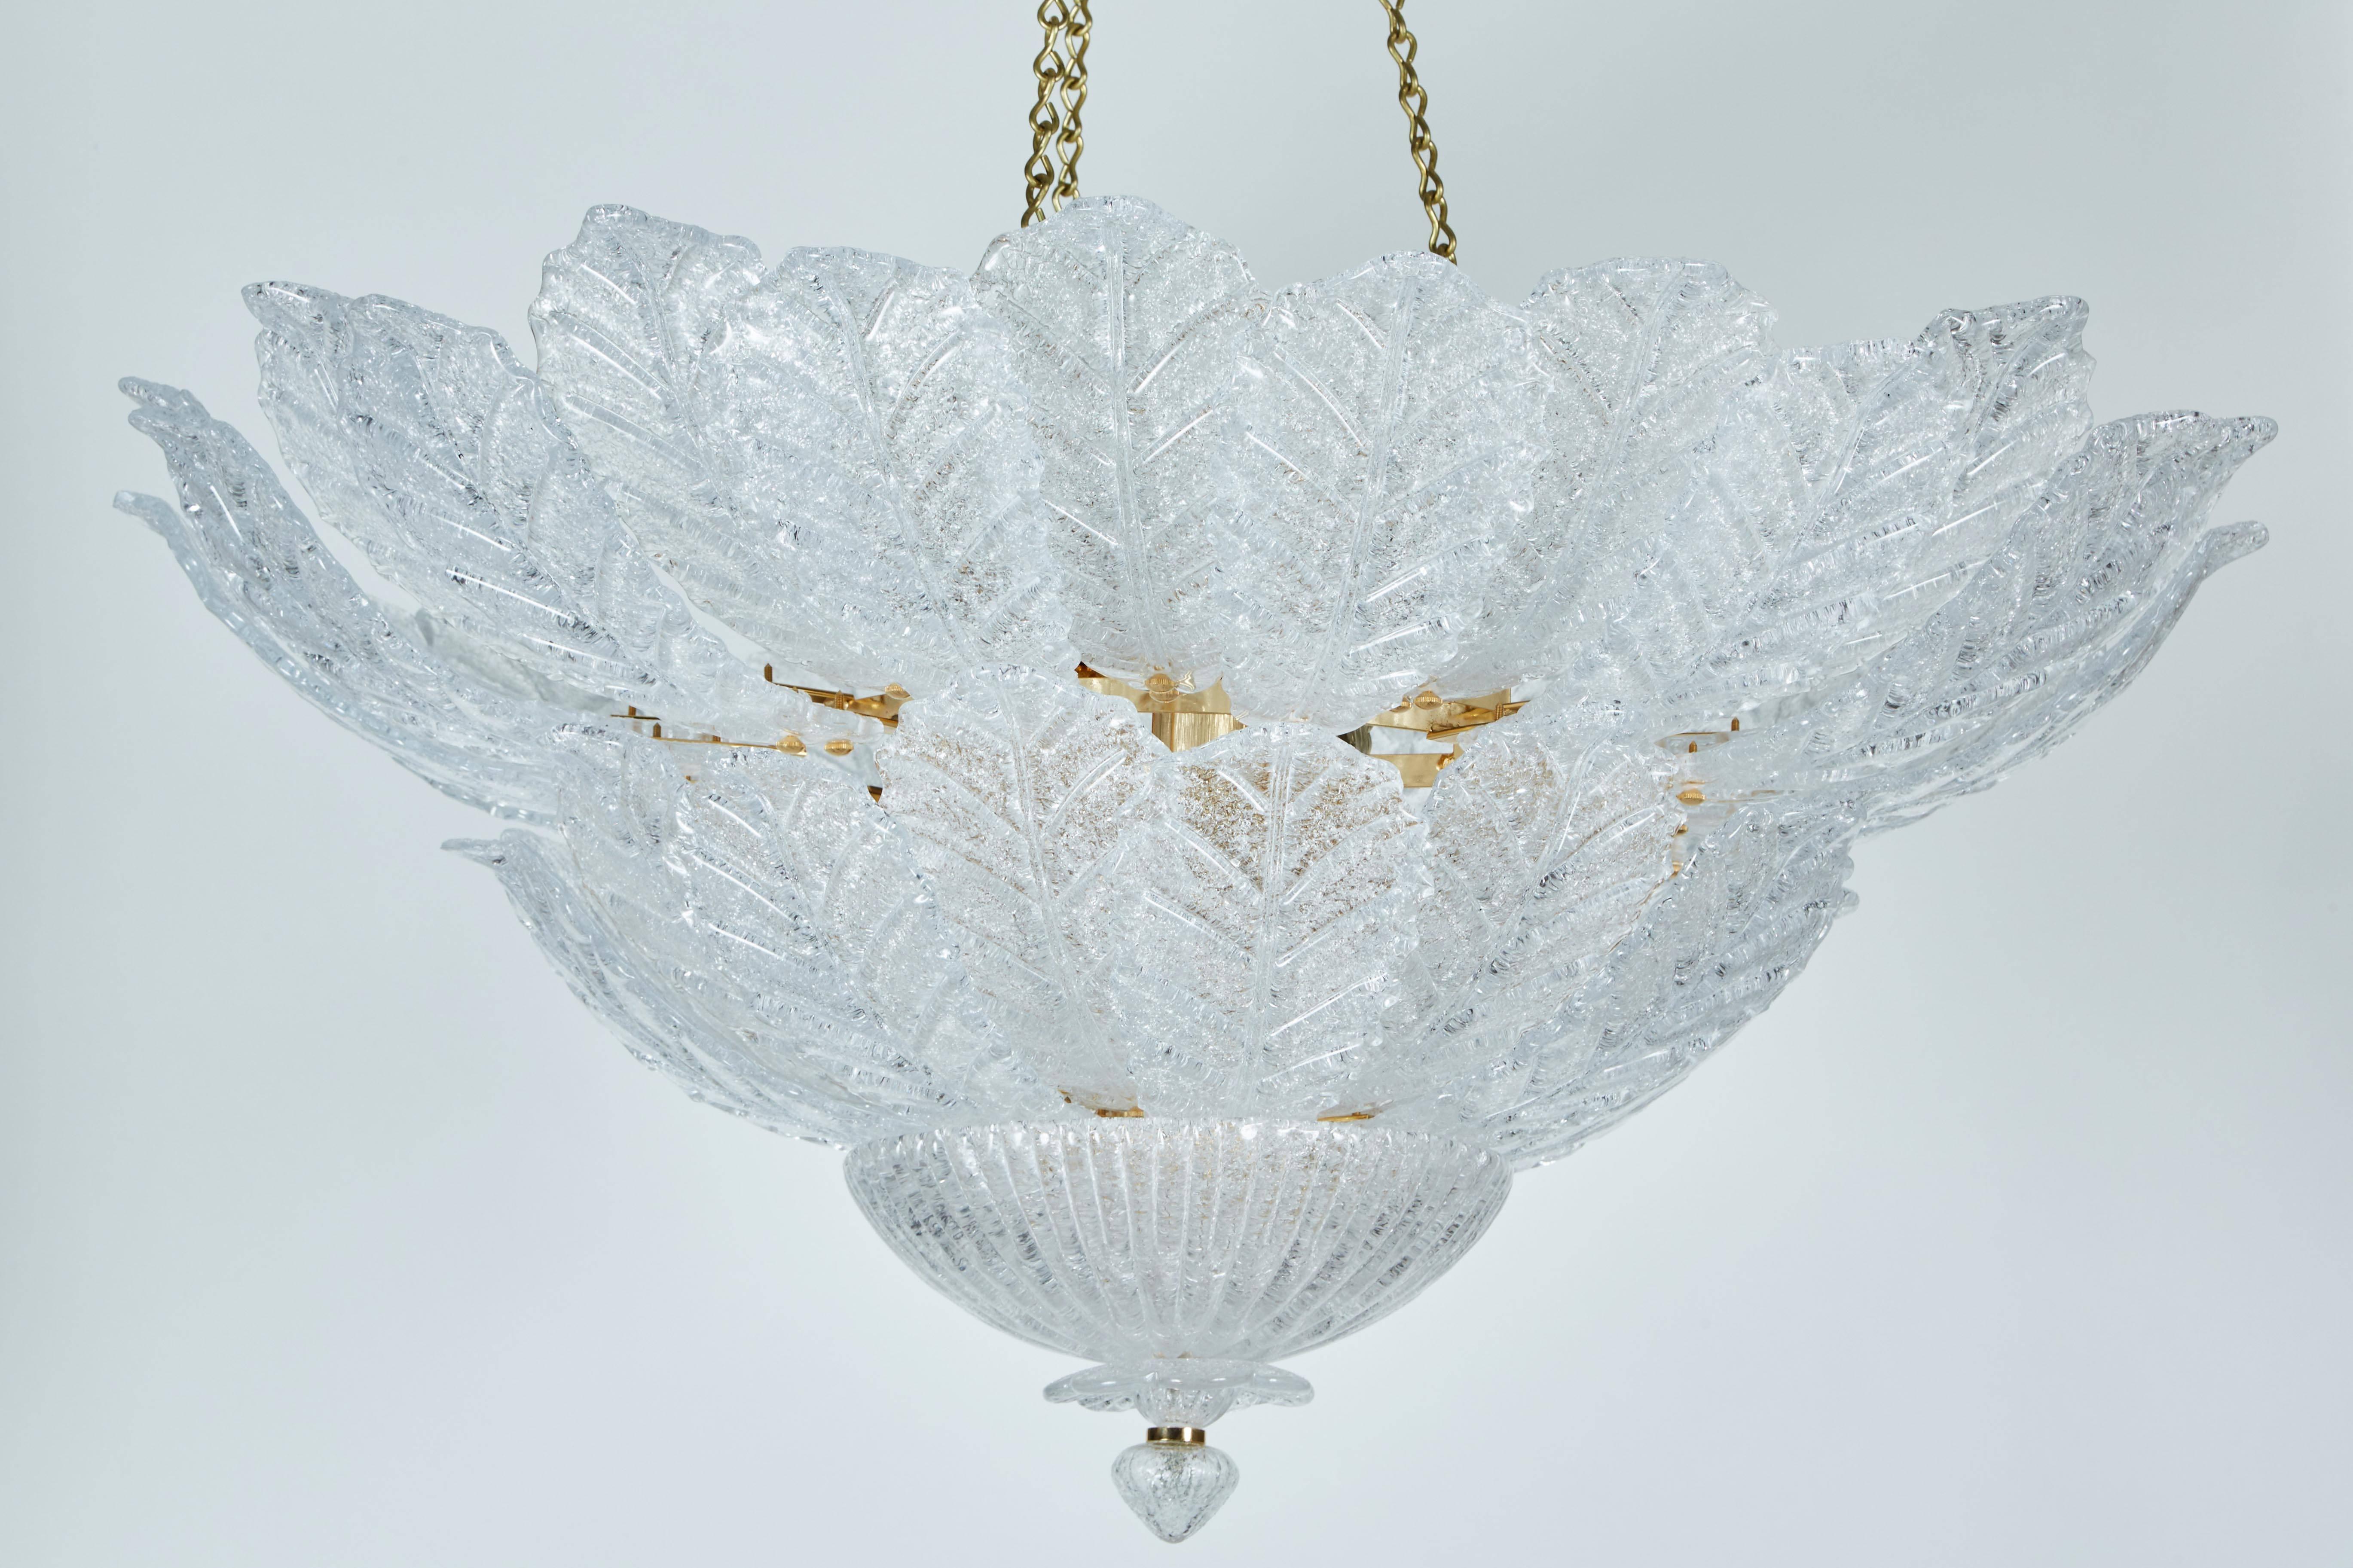 This Italian elegant chandelier with foliage design glass shapes held up by a brass fixture.